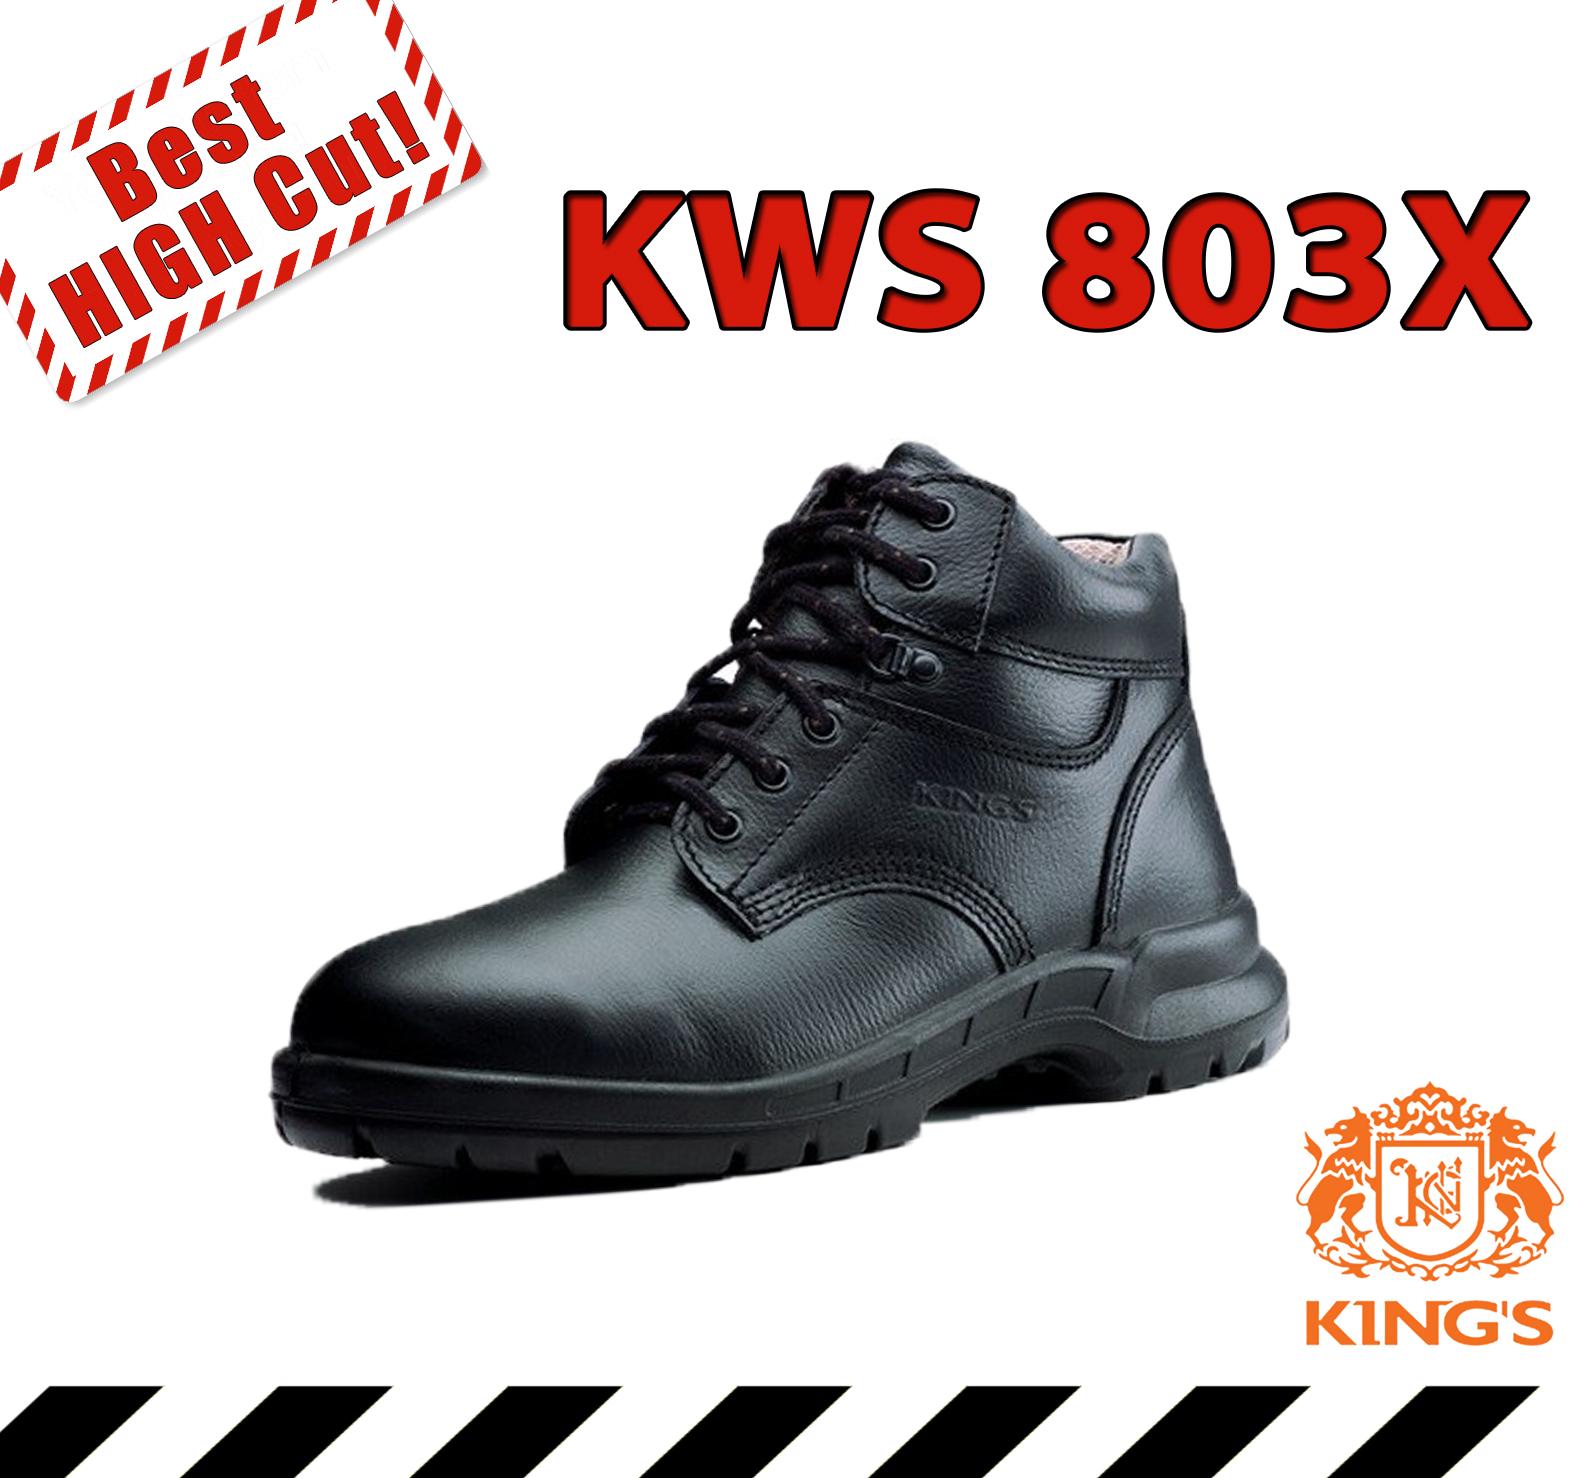 KWS803X – HIGHCUT SAFETY SHOES (King's 